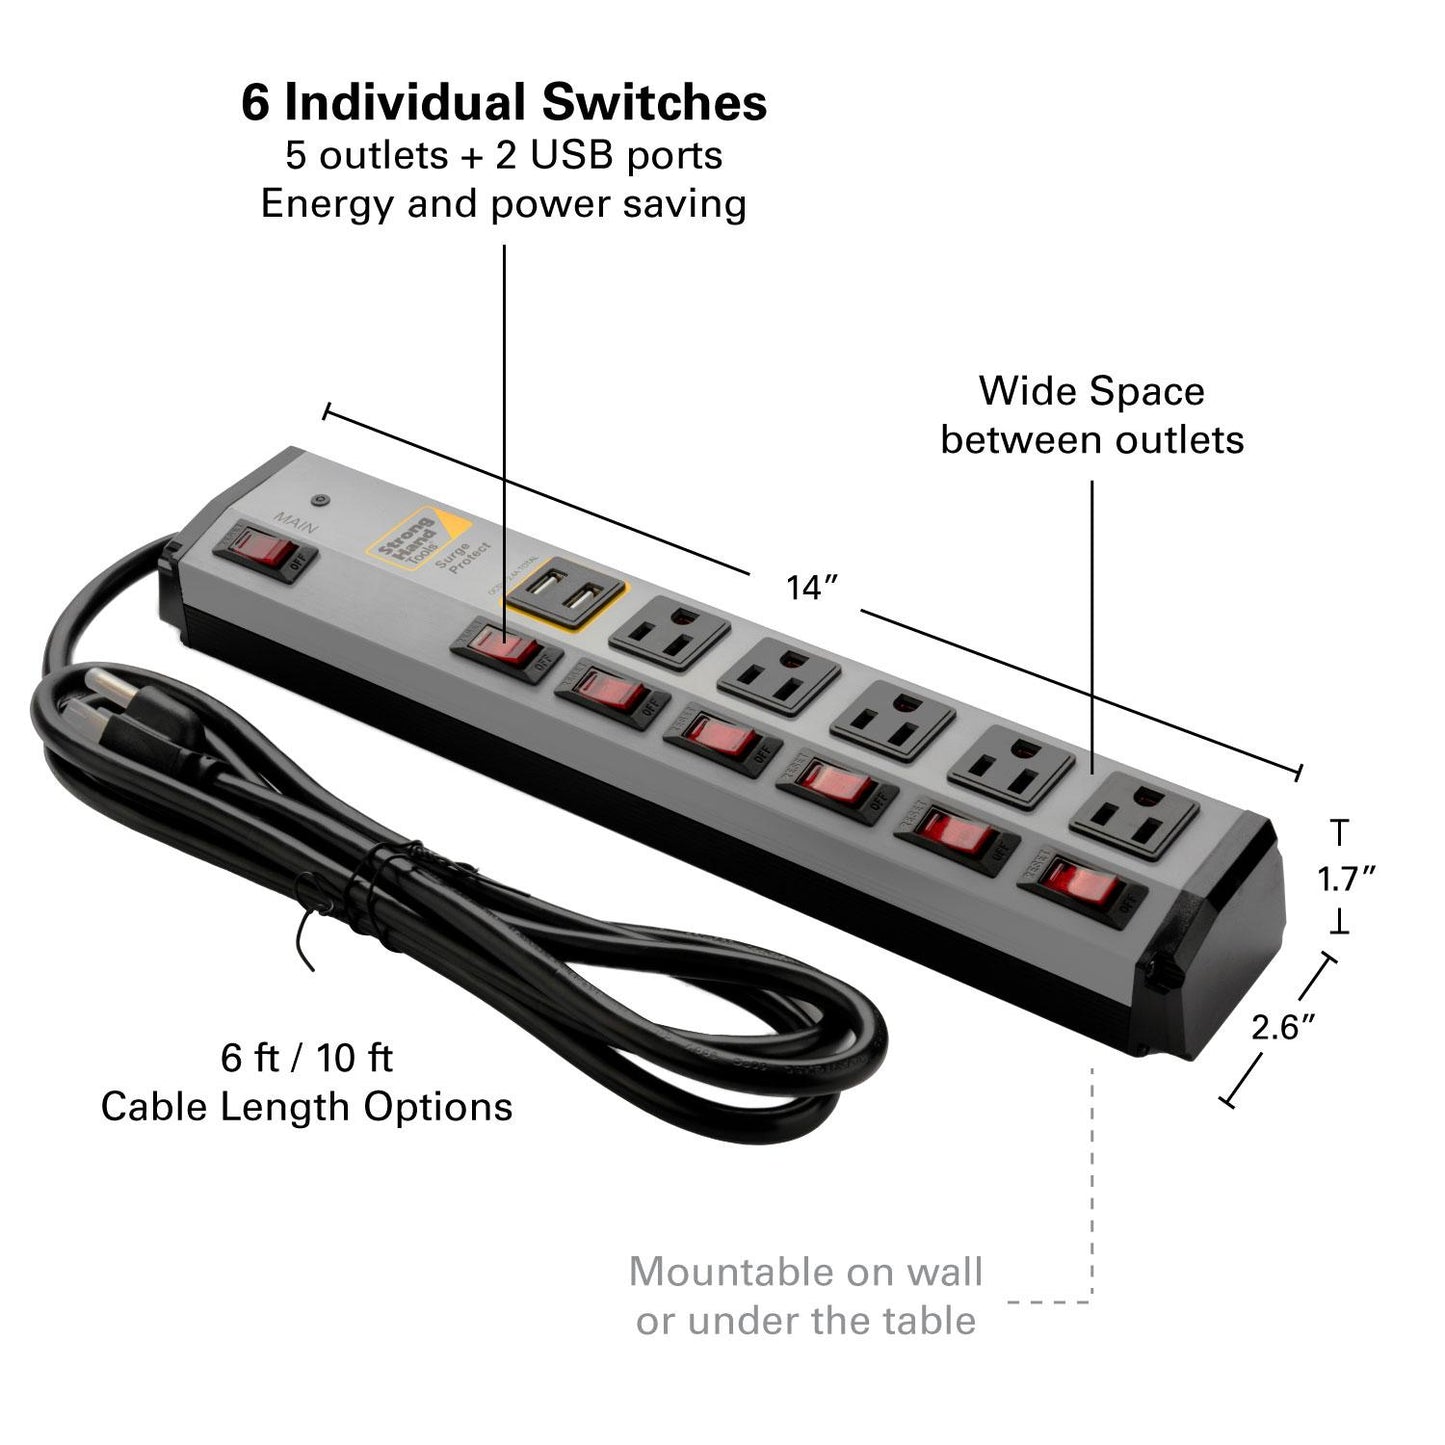 Surge Protector Power Strips w/ USB Port, Metal Case